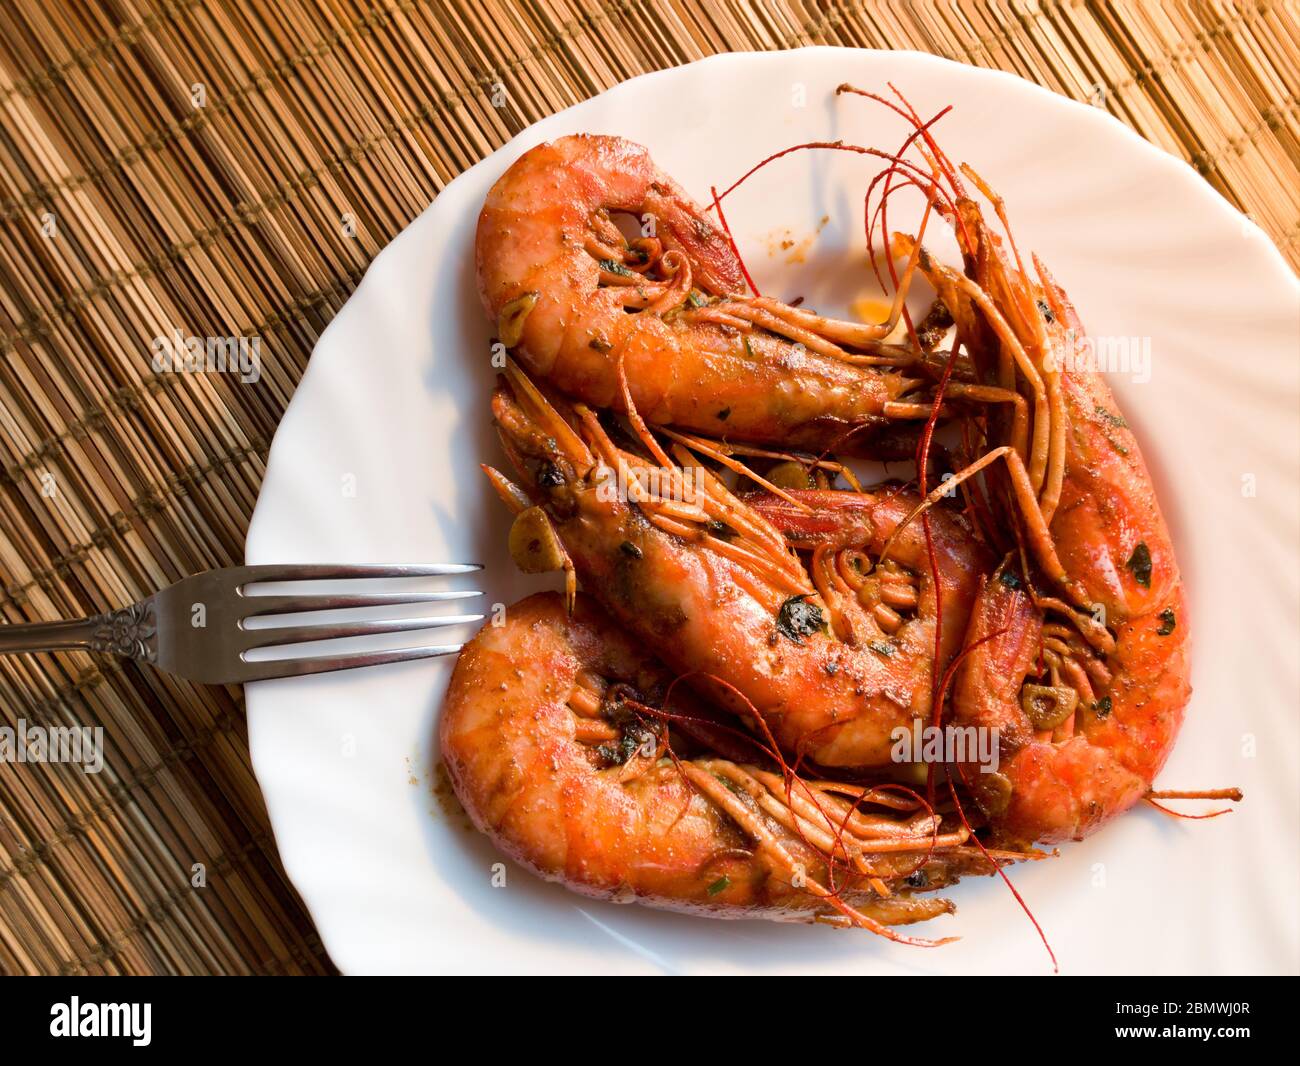 A fried lobster on a white plate, a straw lining under plate, fork, garlic, close up Stock Photo